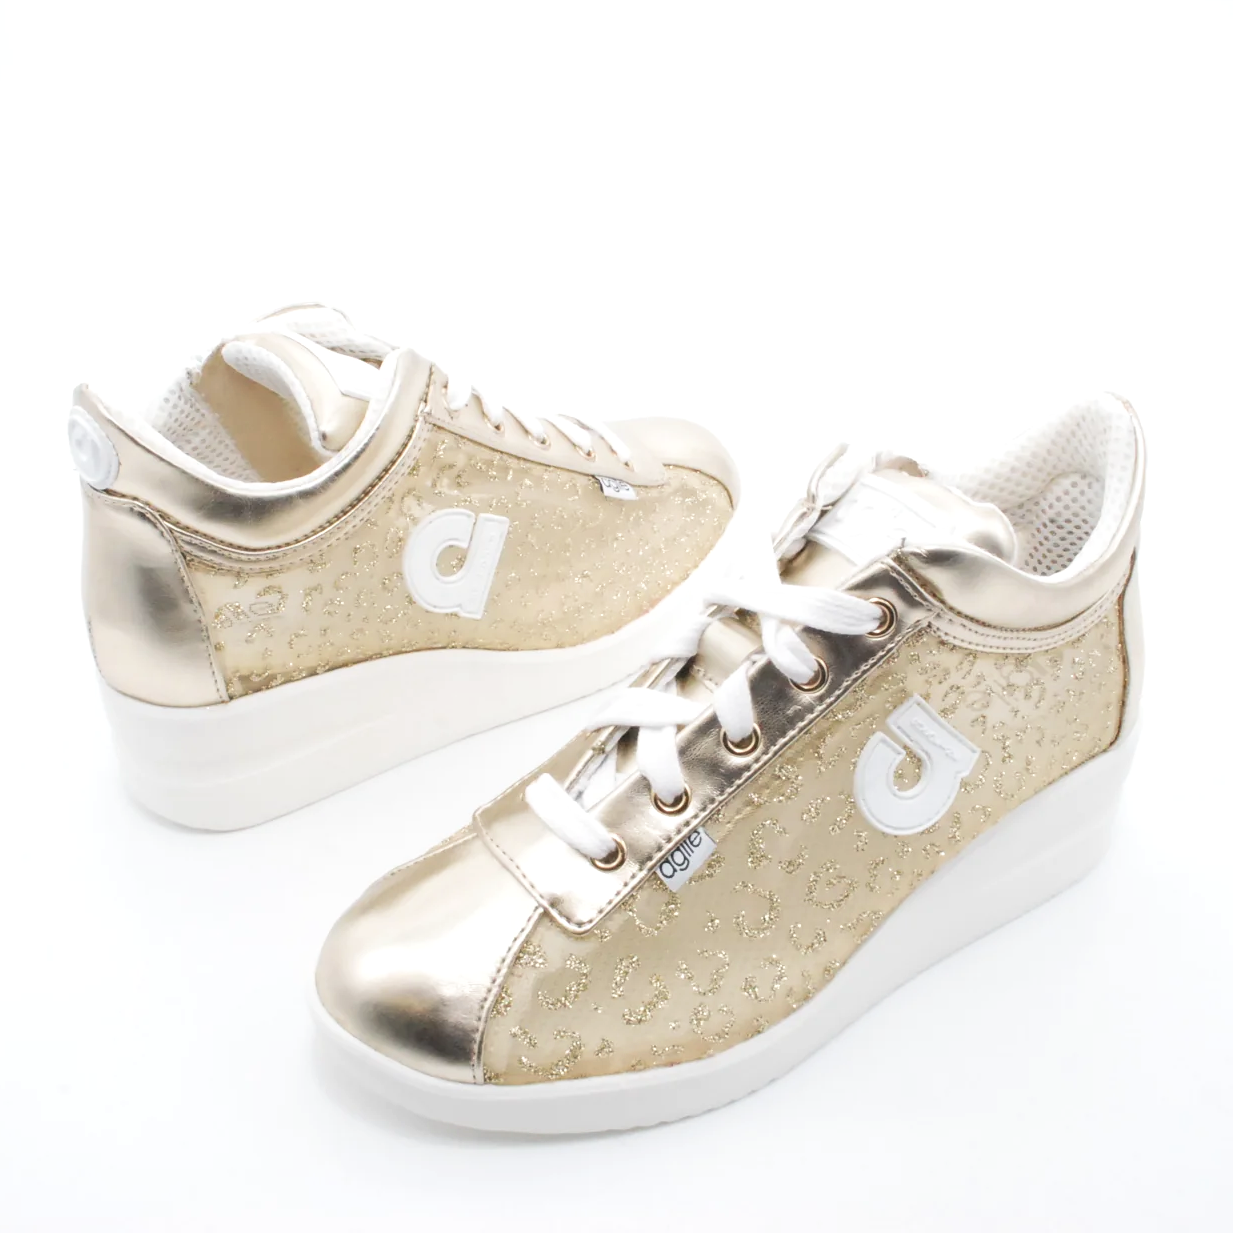 sneakers-agile-by-rucoline-sneakers-2_66bddffb-b69a-4e4c-b045-f149ad59b990.png